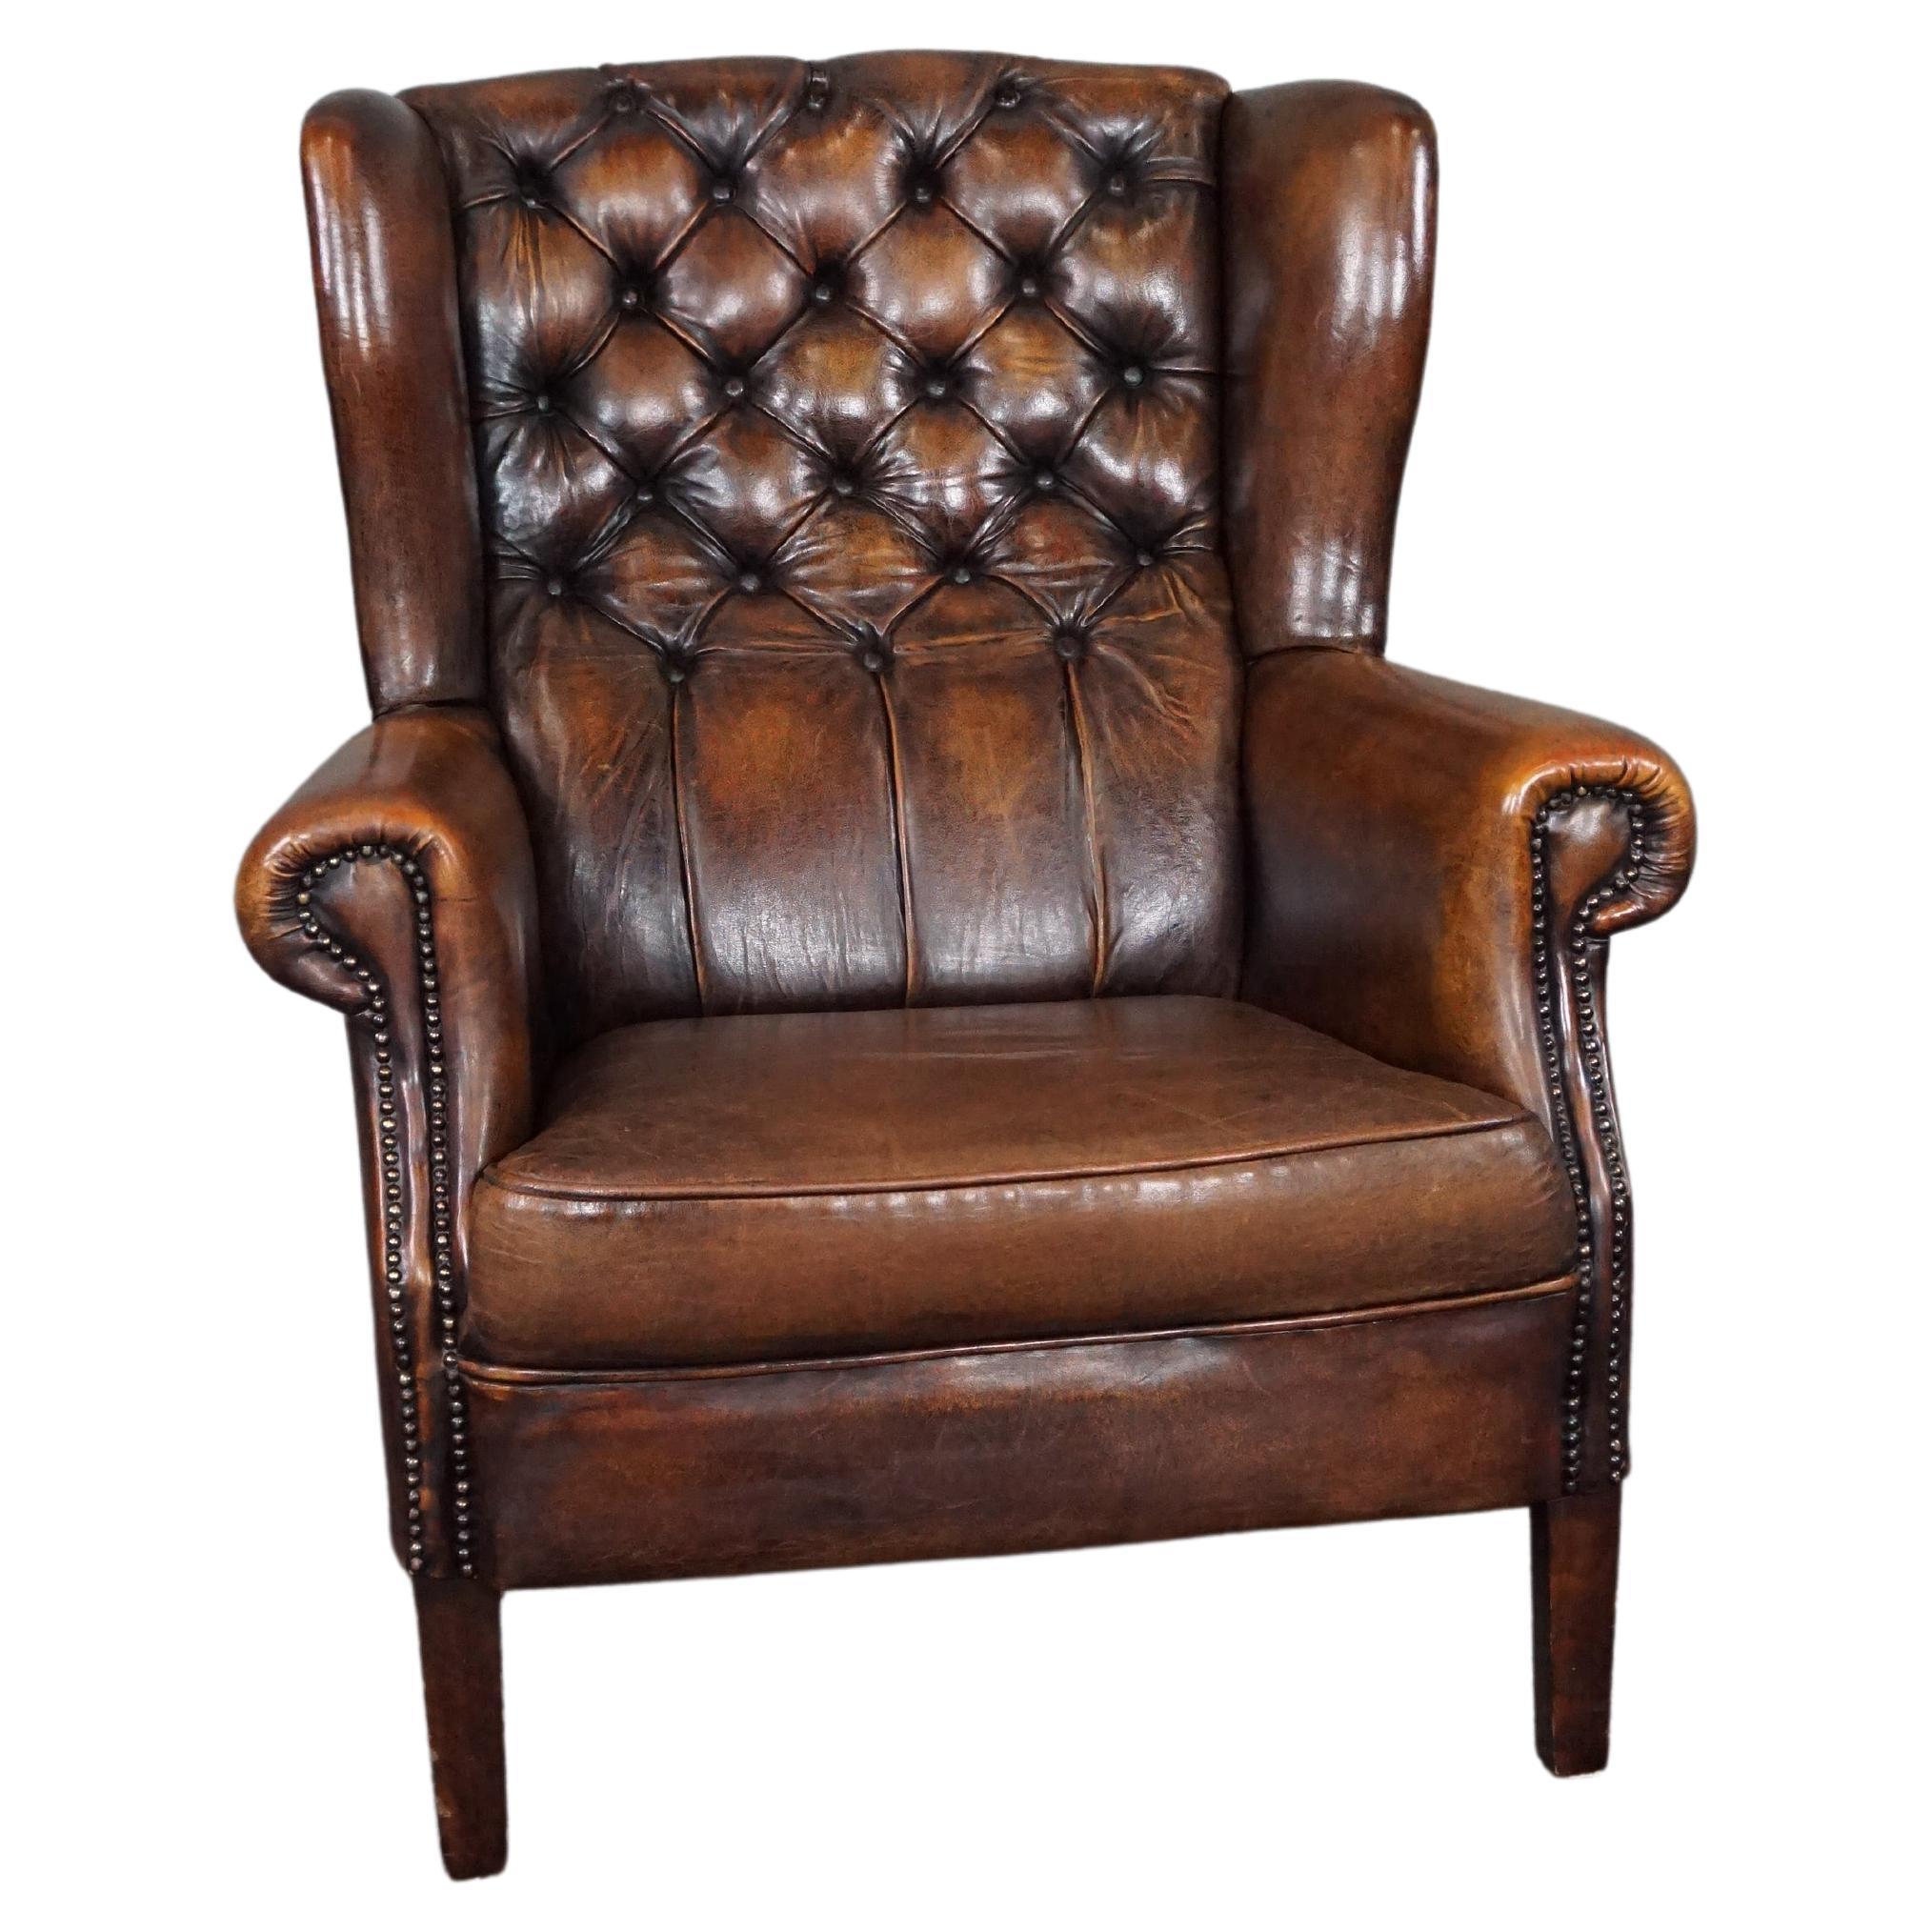 Very beautiful, rare sheep leather wing chair For Sale